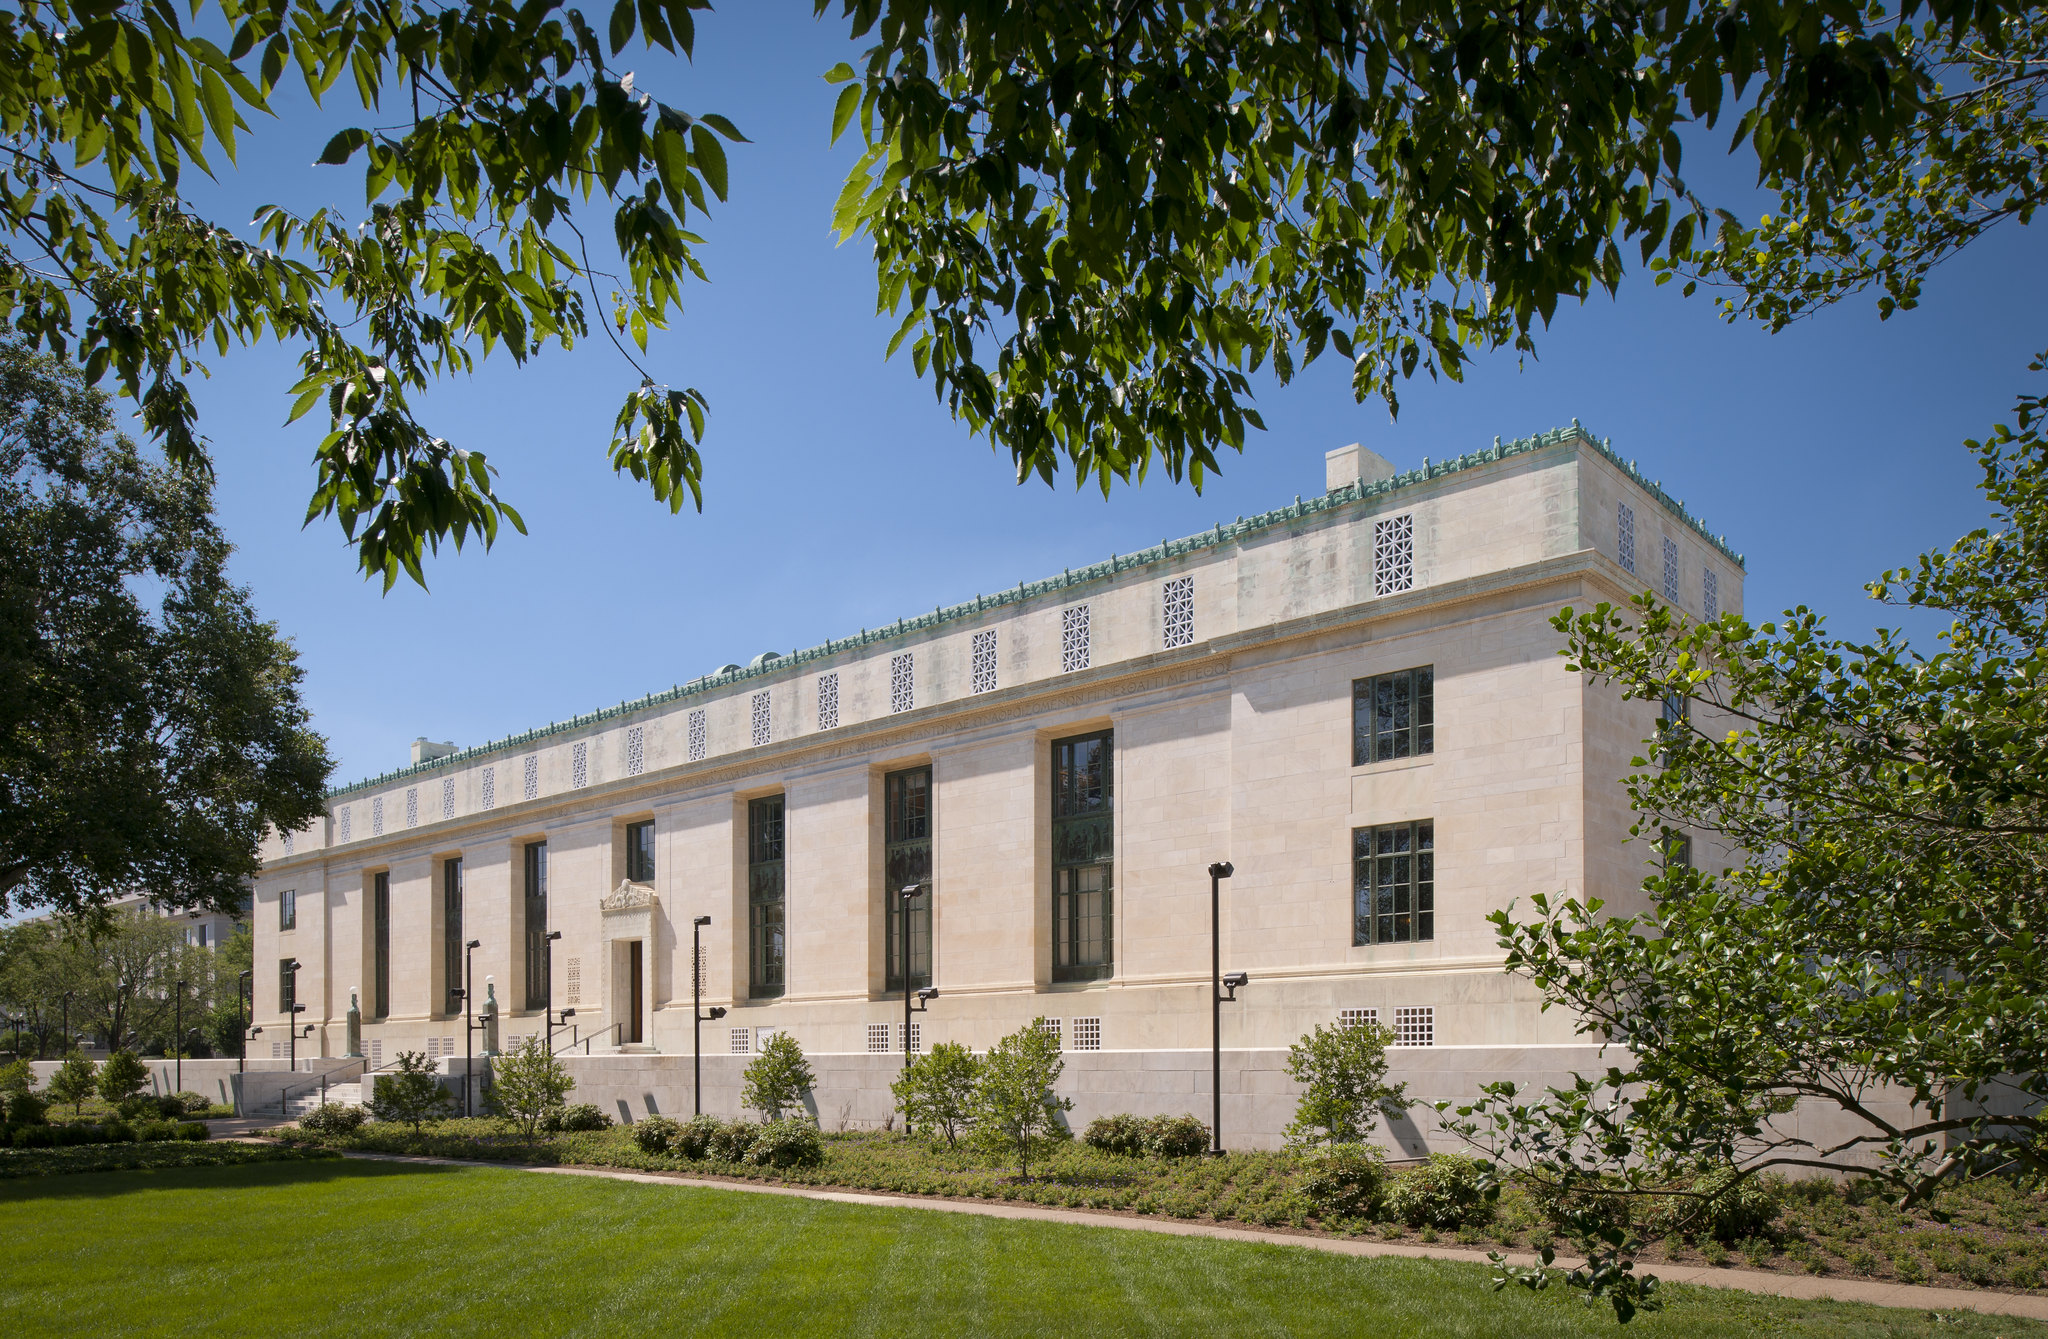 National Academy of Sciences building, Washington, D.C. Photo by Maxwell MacKenzie, Flickr.